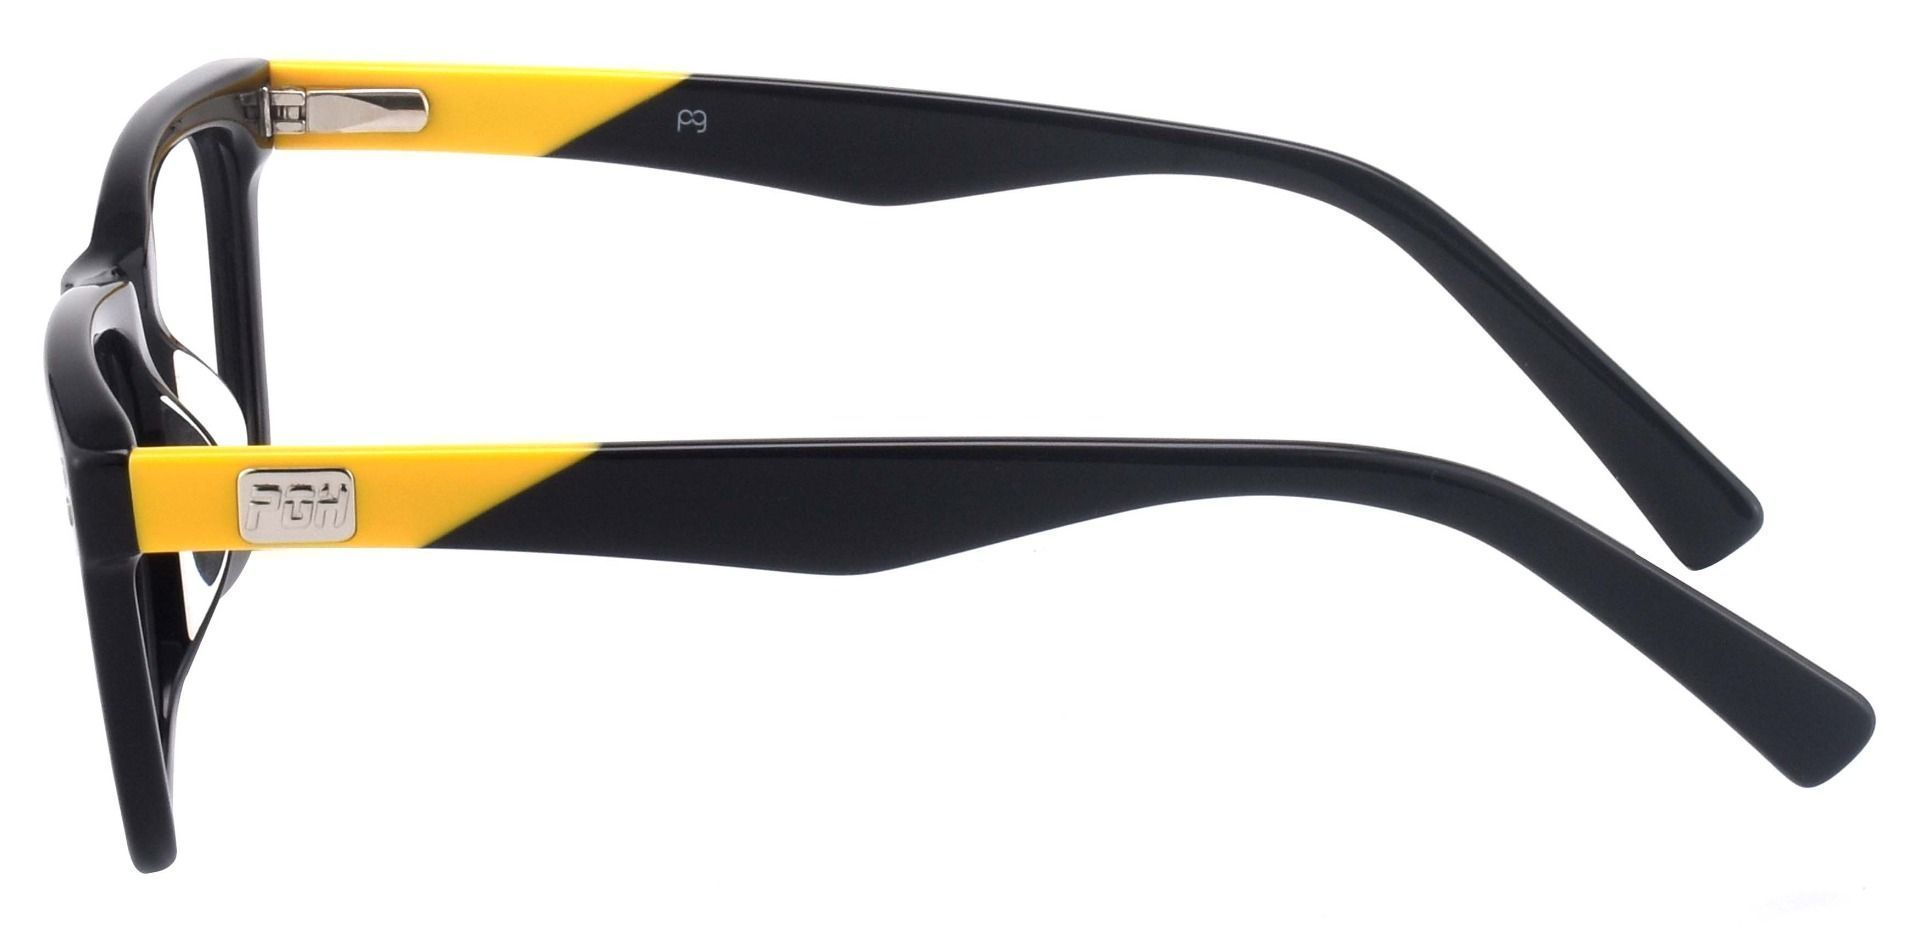 Liberty Rectangle Prescription Glasses - The Frame Is Black And Gold